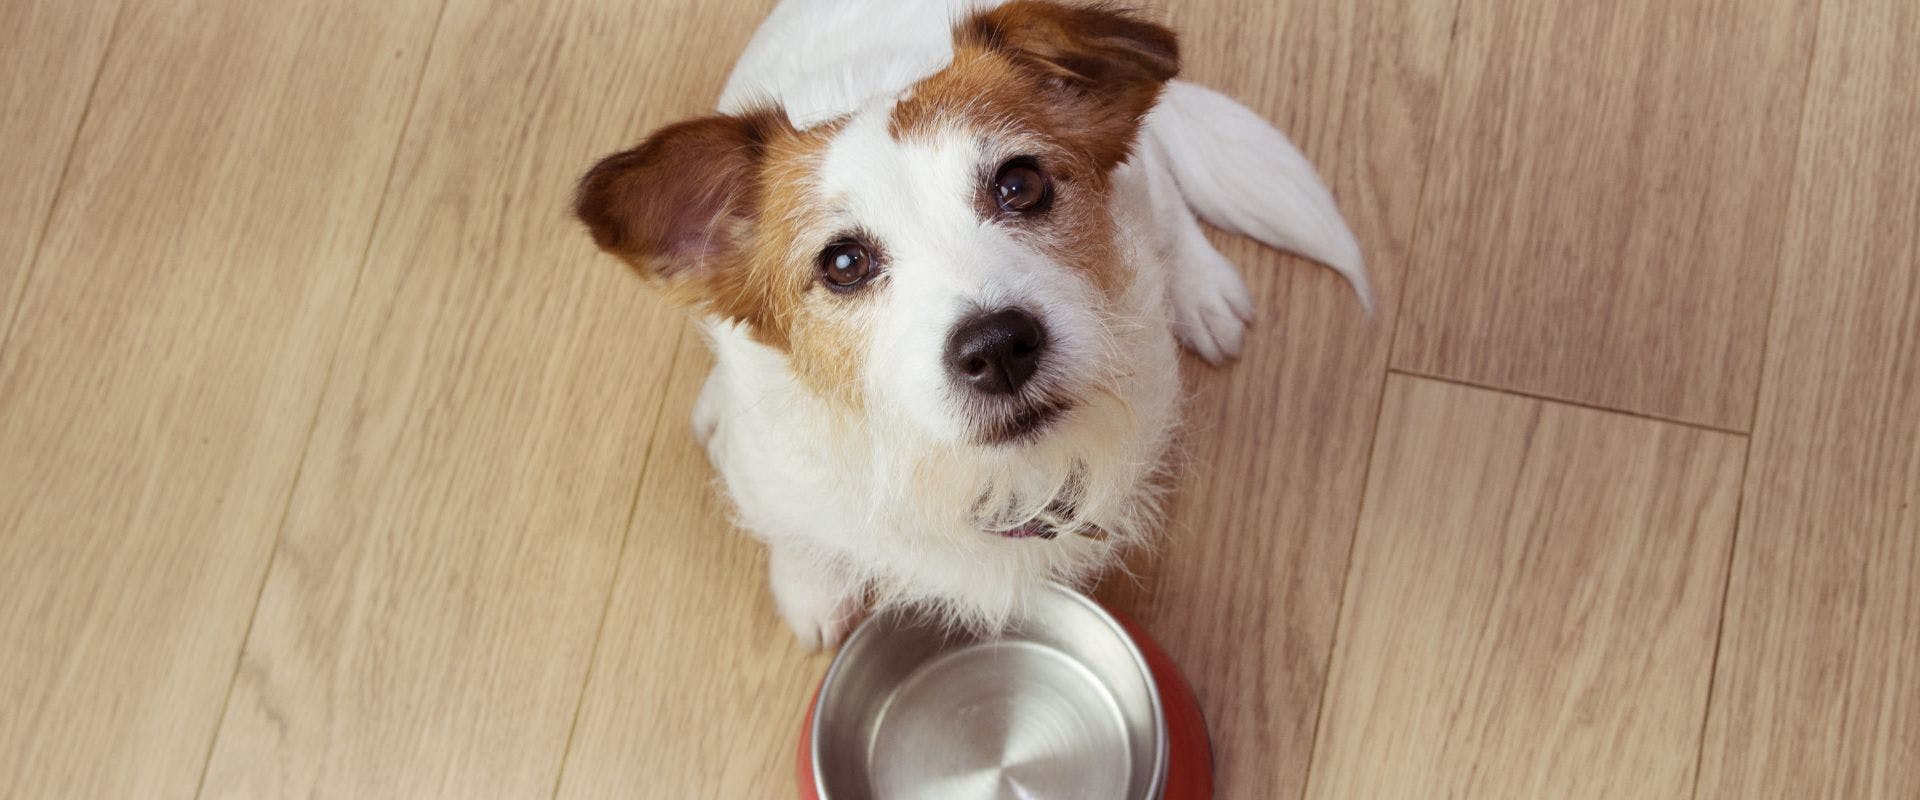 Long-haired Jack Russell waiting for food